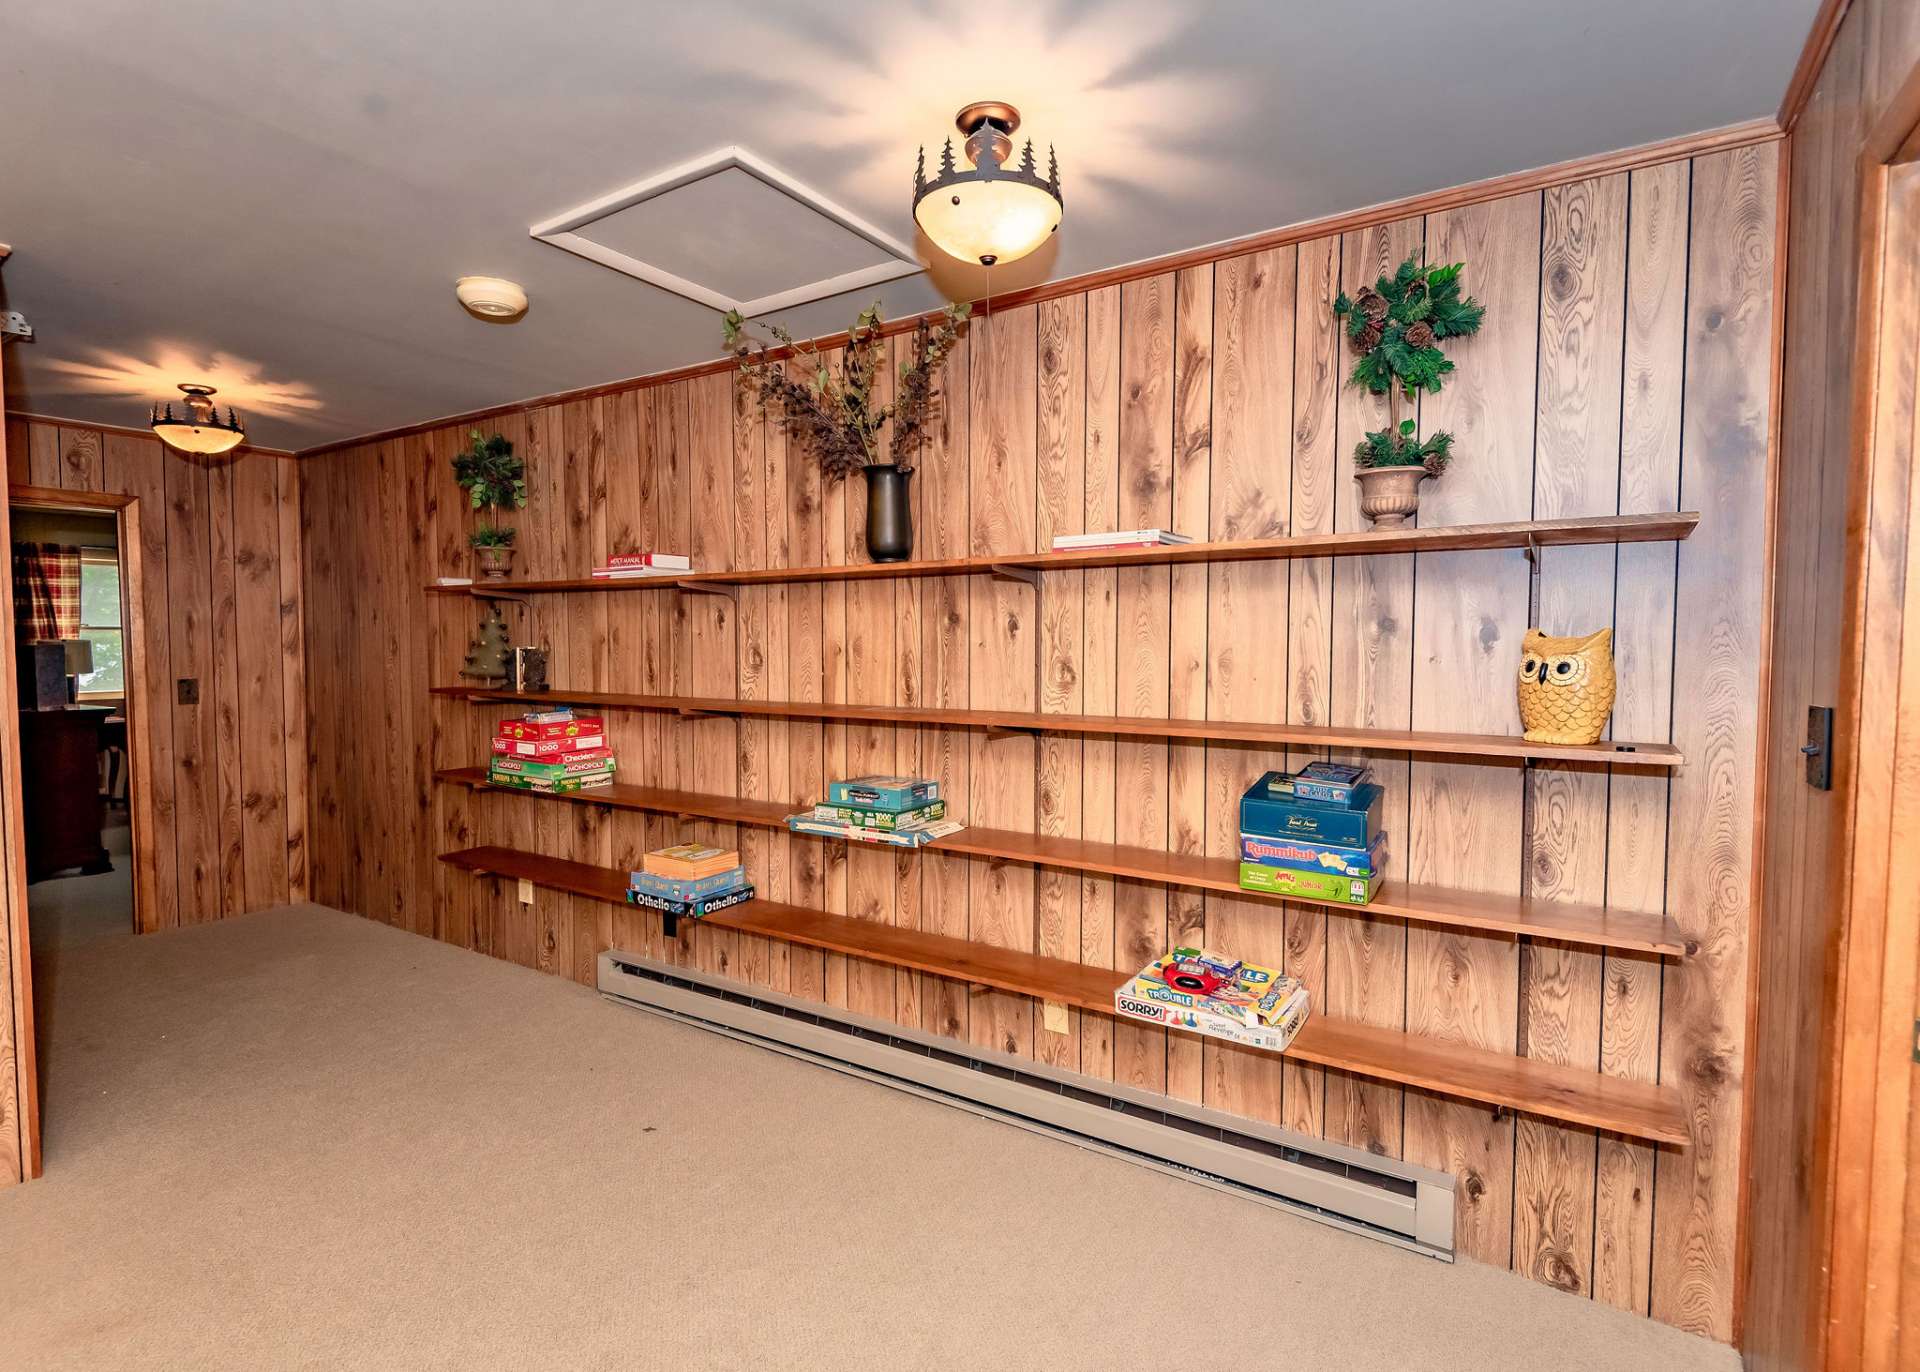 The upper level offers the loft area with shelving, perfect for showcasing your collectibles, or office space.